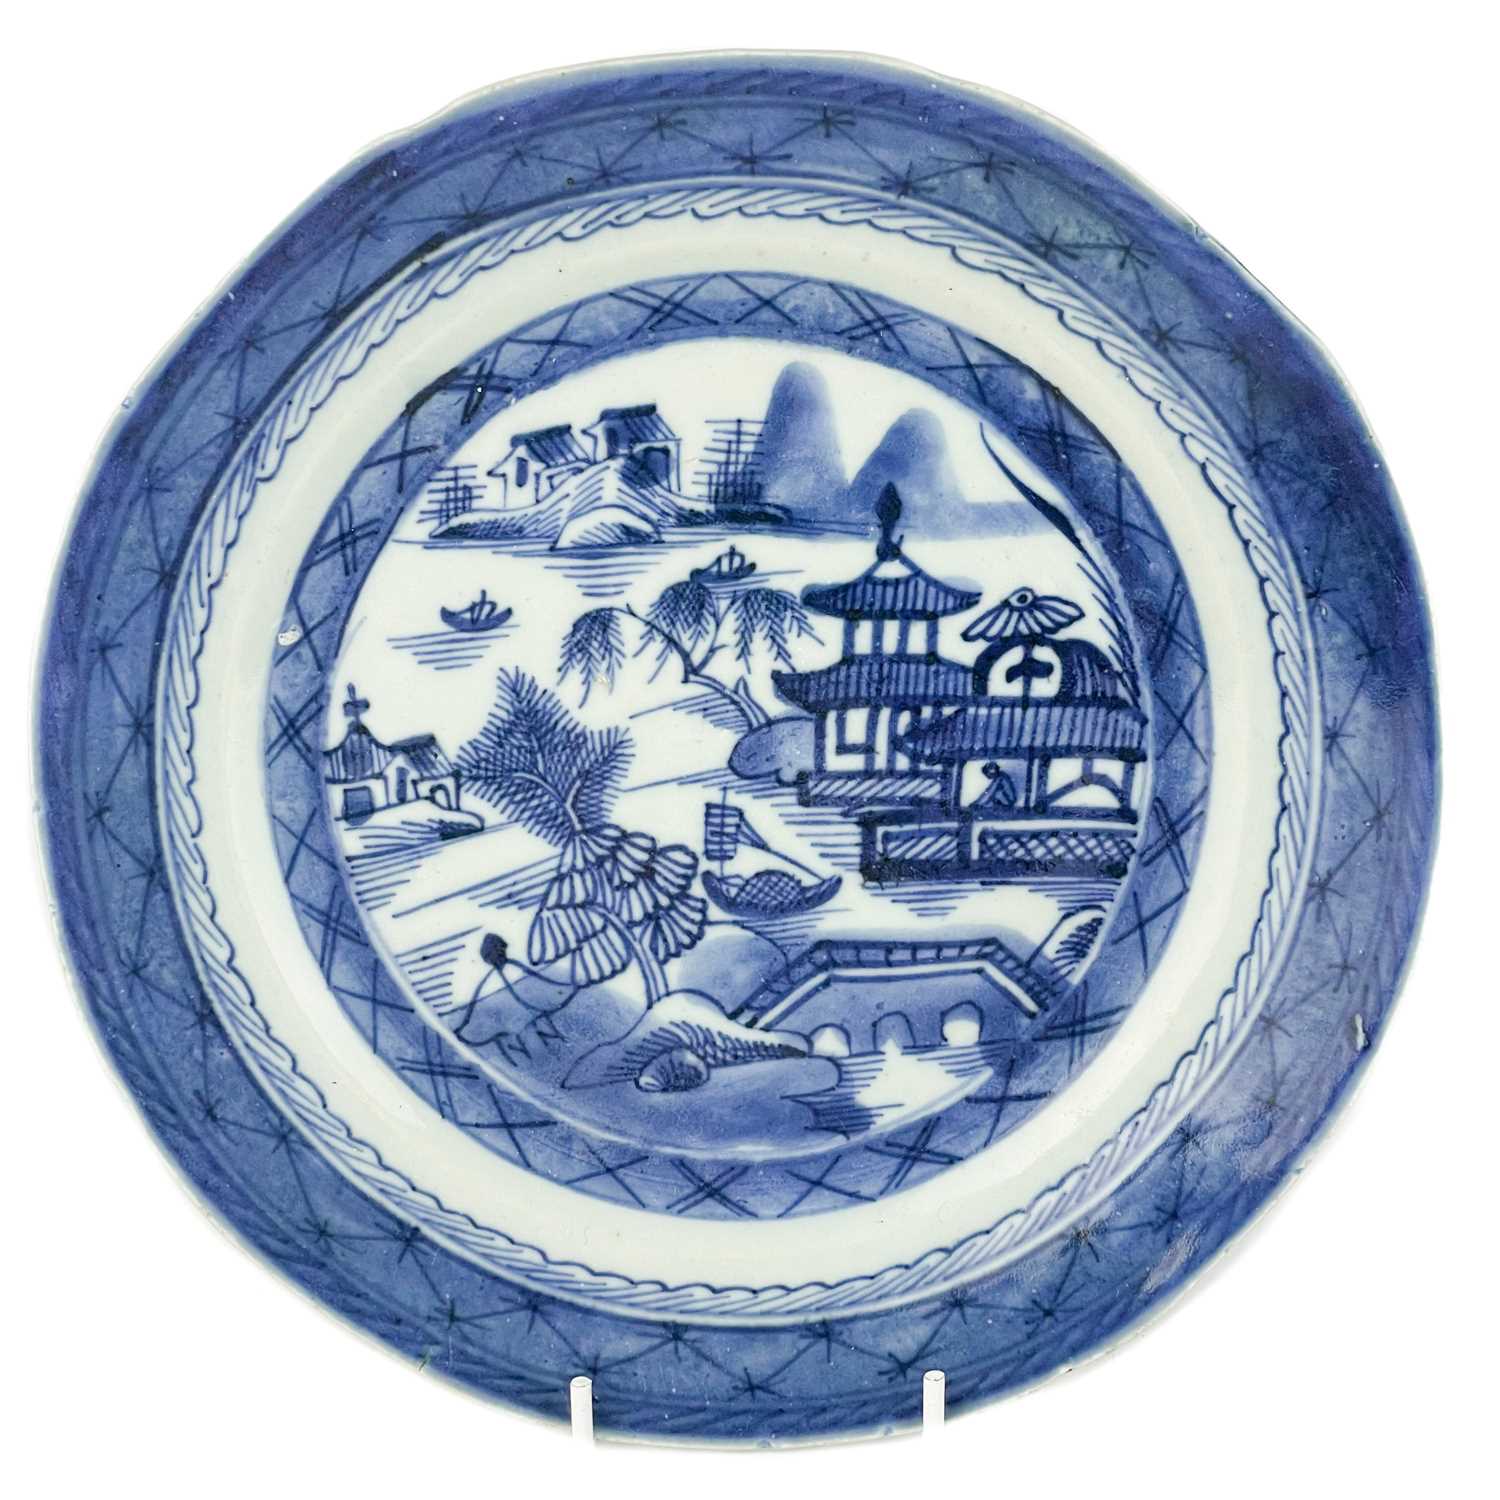 A selection of various Chinese porcelain, 18th century. - Image 2 of 15